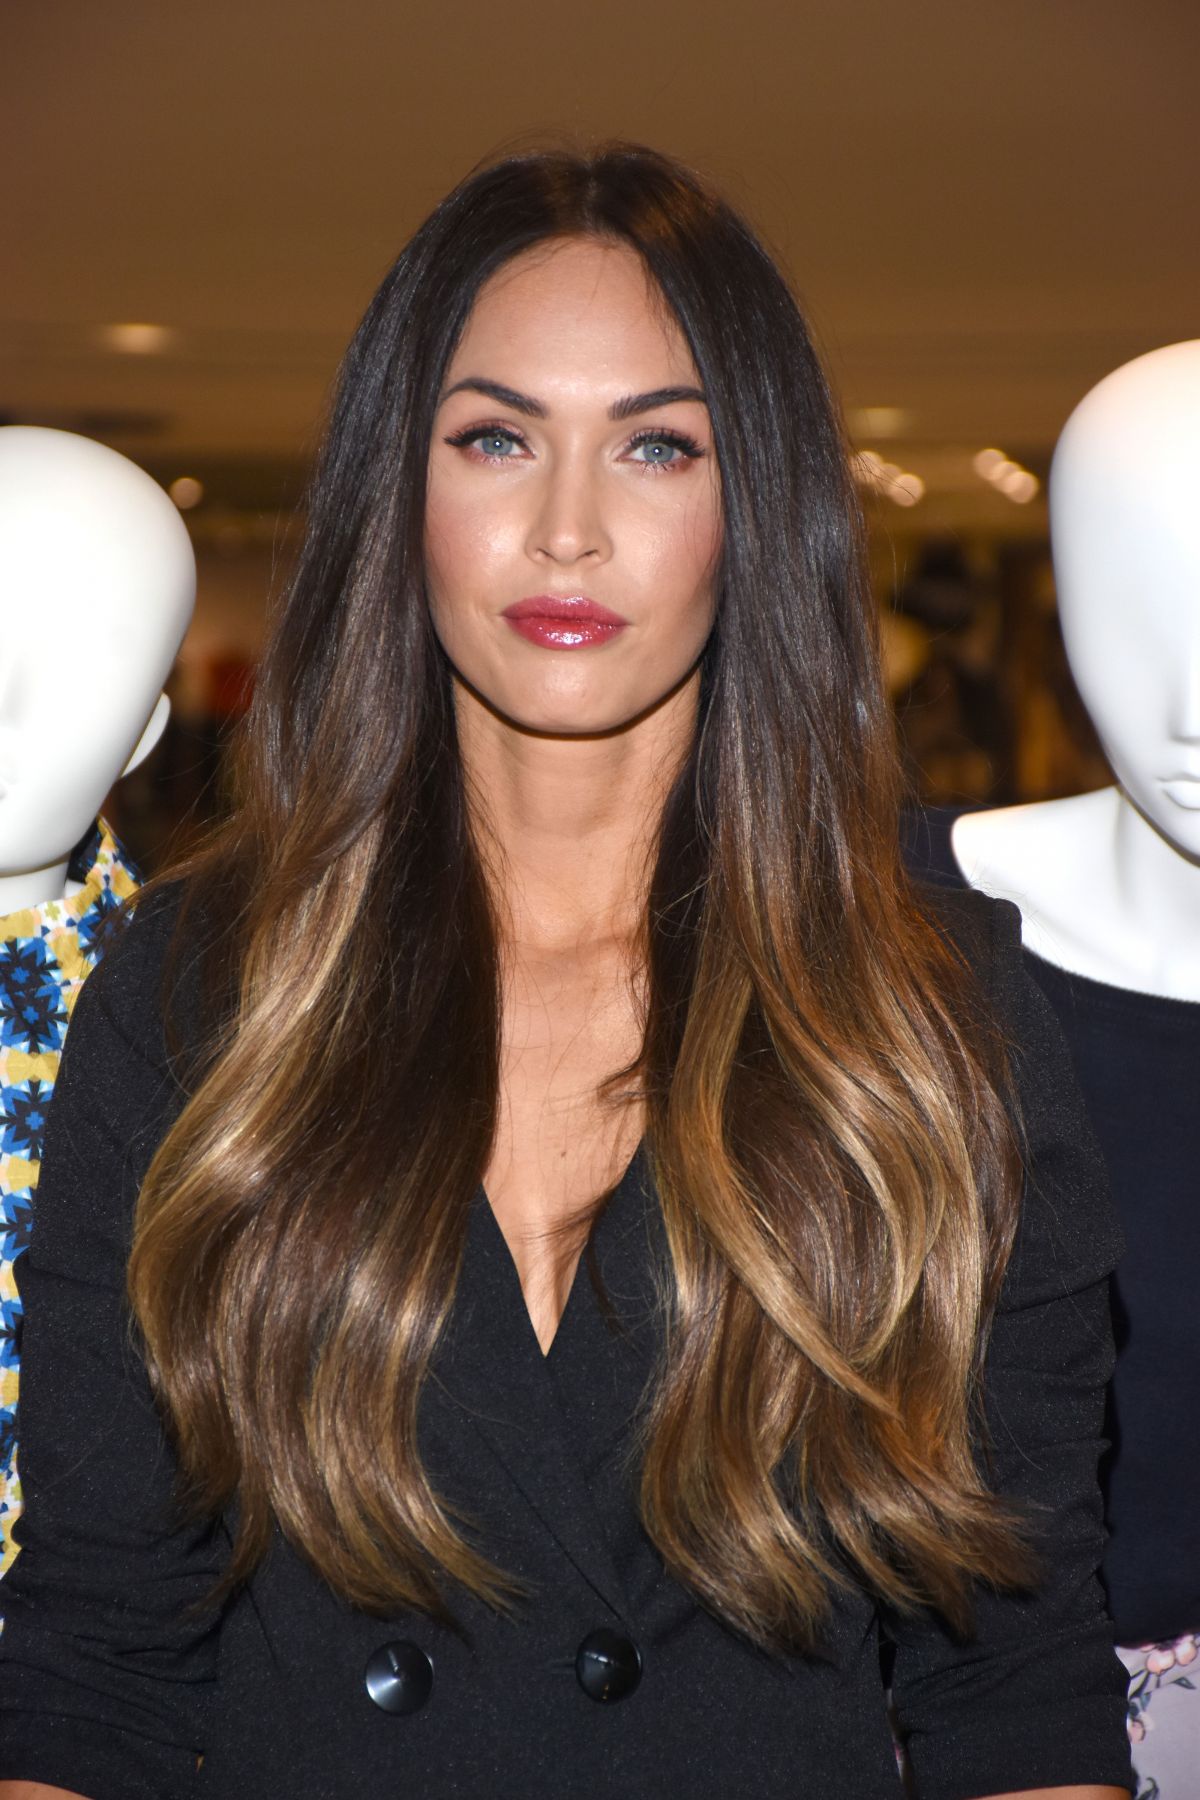 MEGAN FOX at Liverpool Fashion Fest in Mexico City 09/06/2017 – HawtCelebs